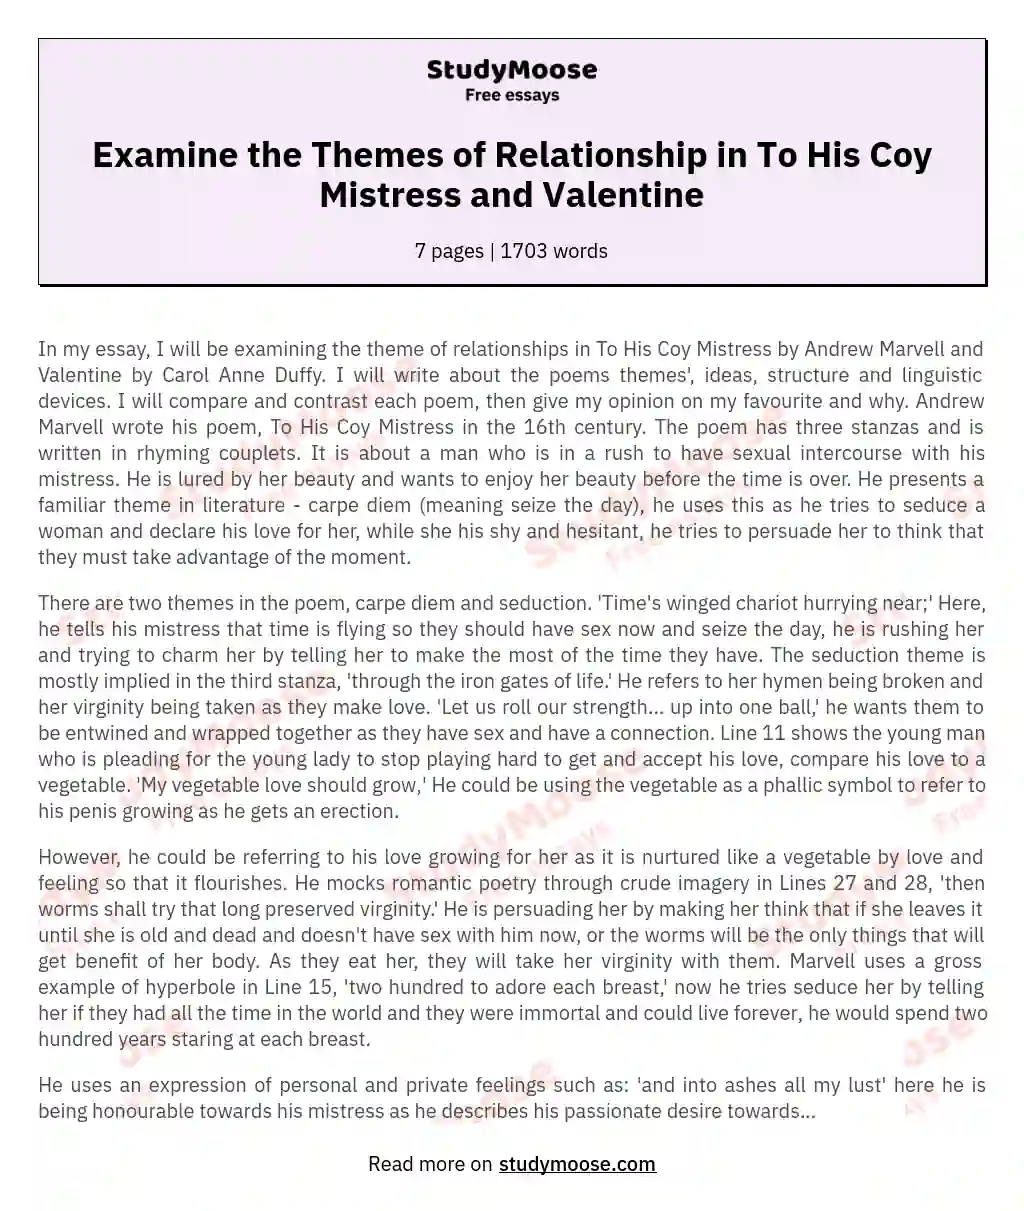 Examine the Themes of Relationship in To His Coy Mistress and Valentine